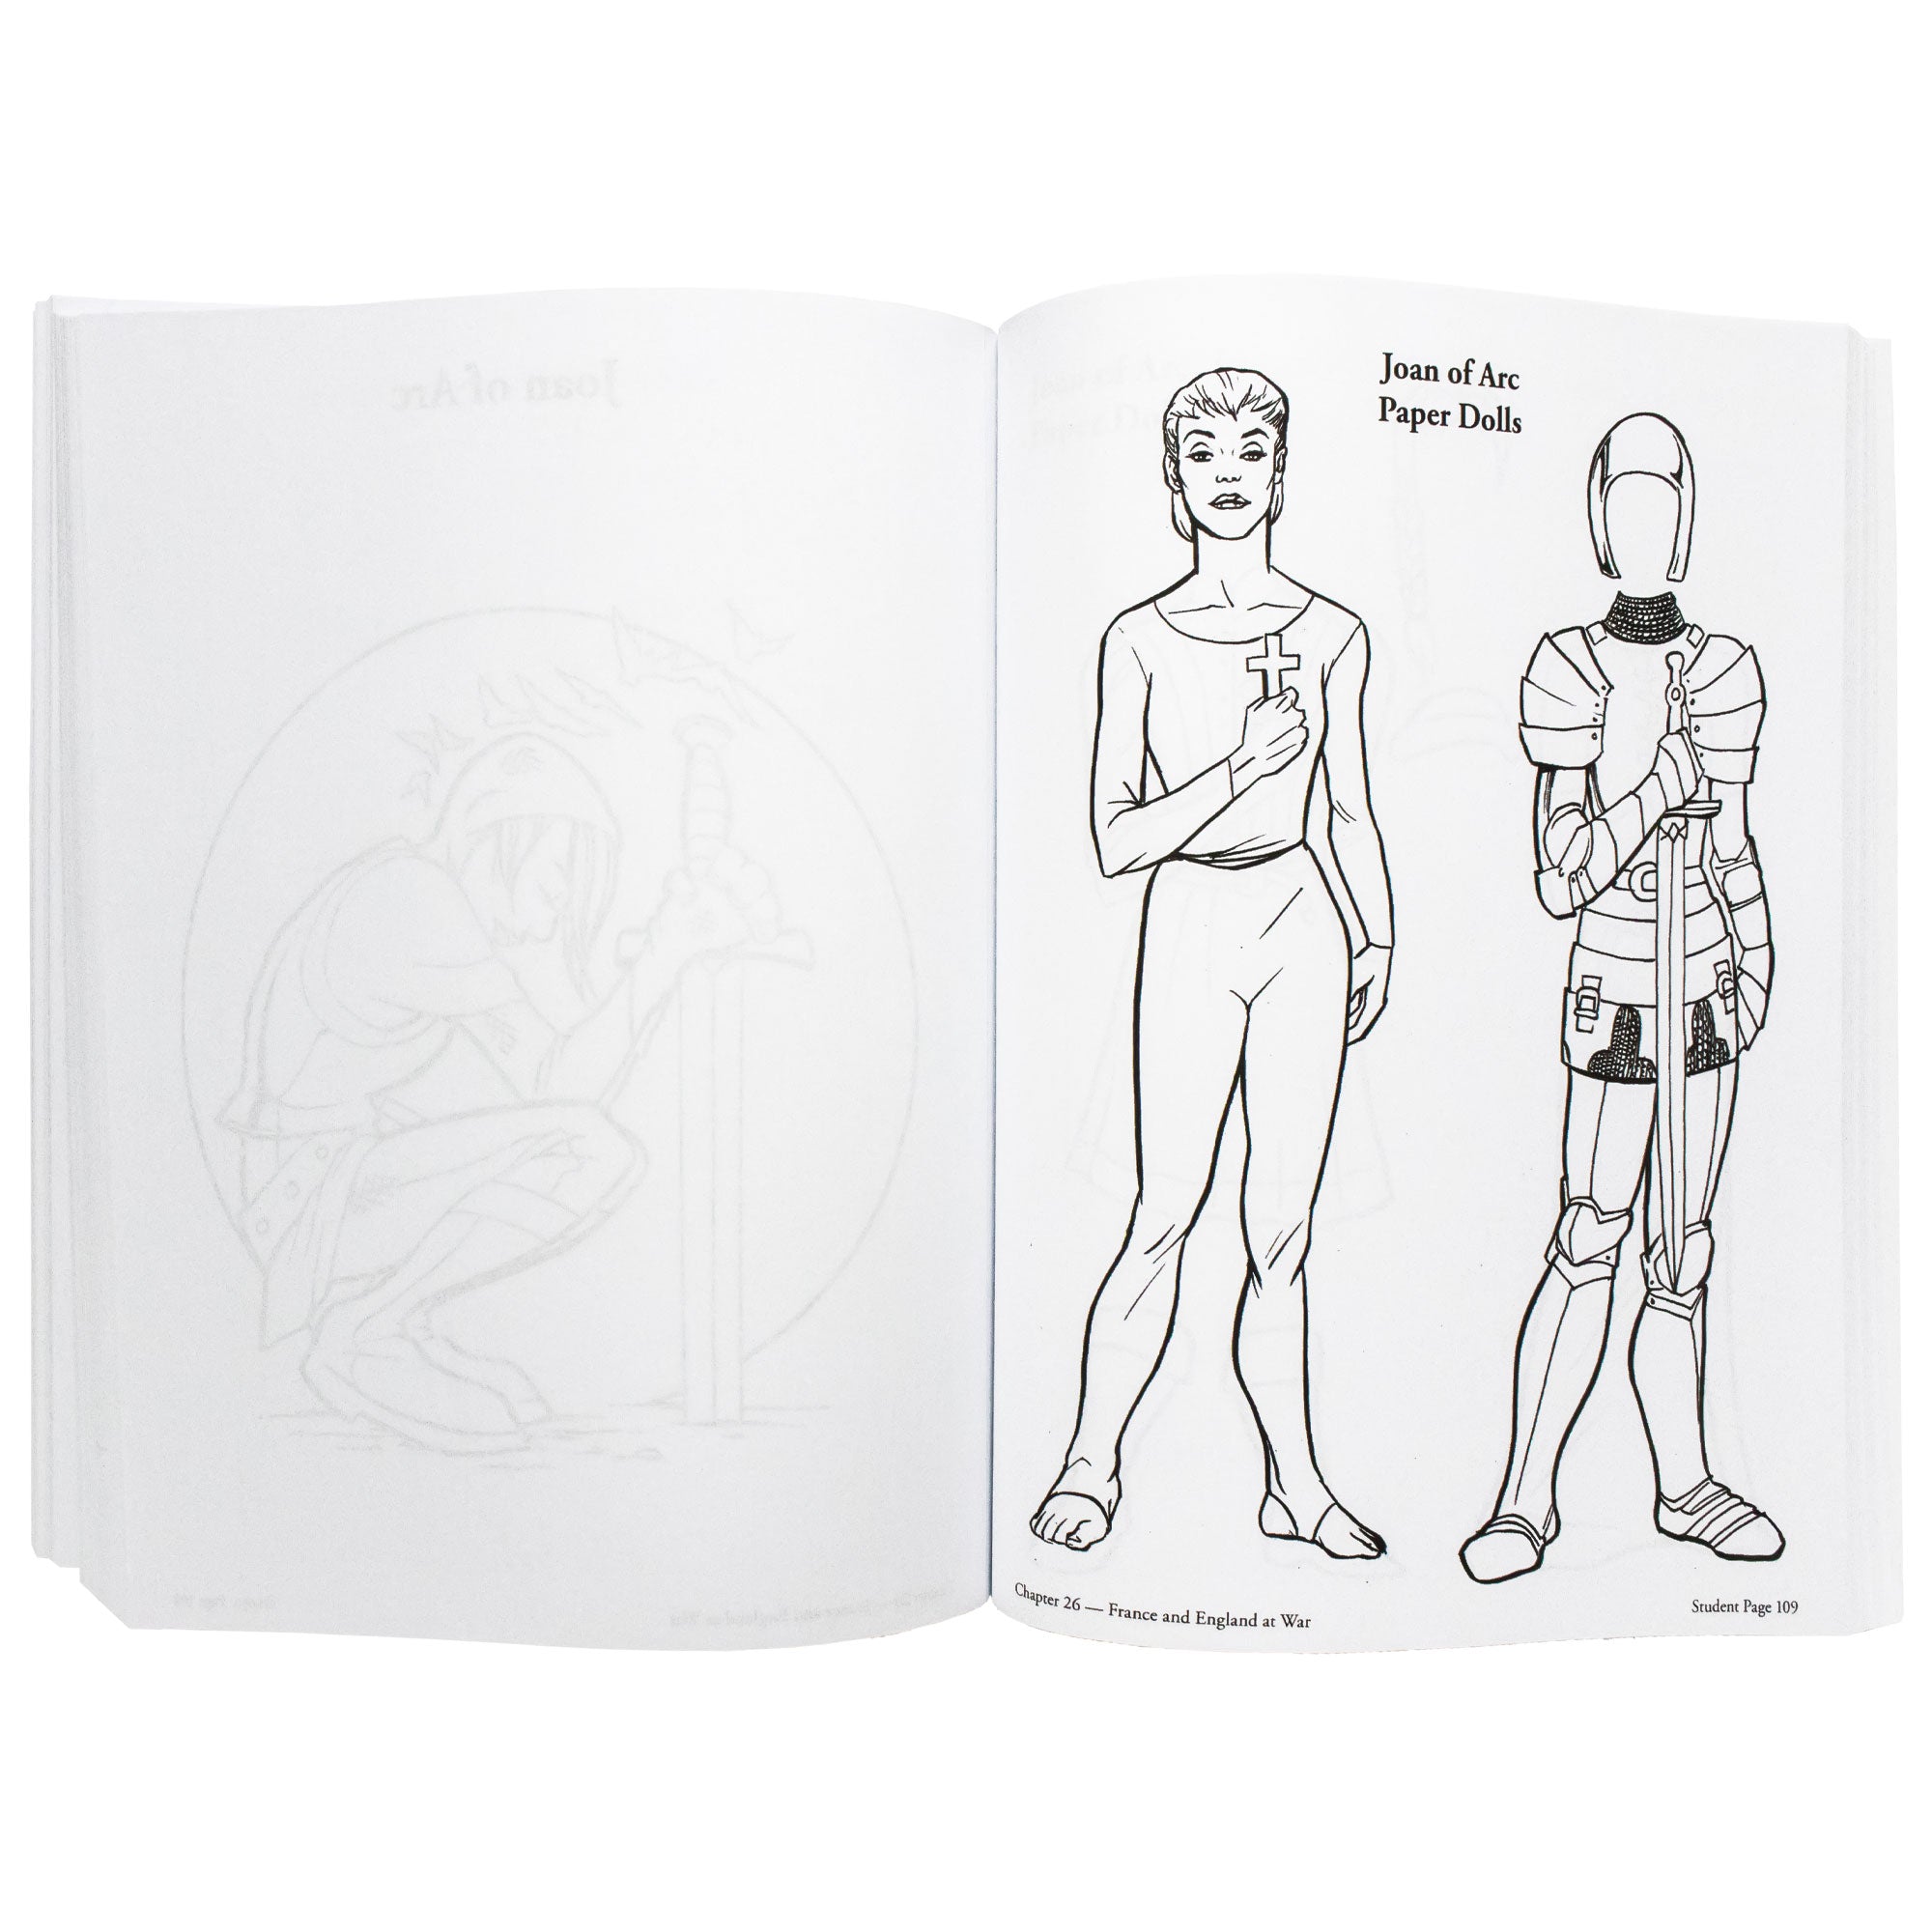 The Story of the World 2 Activity book open to show inside pages. The left page is blank, but you can see through to a black and white coloring page of Joan of Arc on the other side. The right page shows a Joan of Arc Paper Doll with a suit of armor to the right to fit over the top.